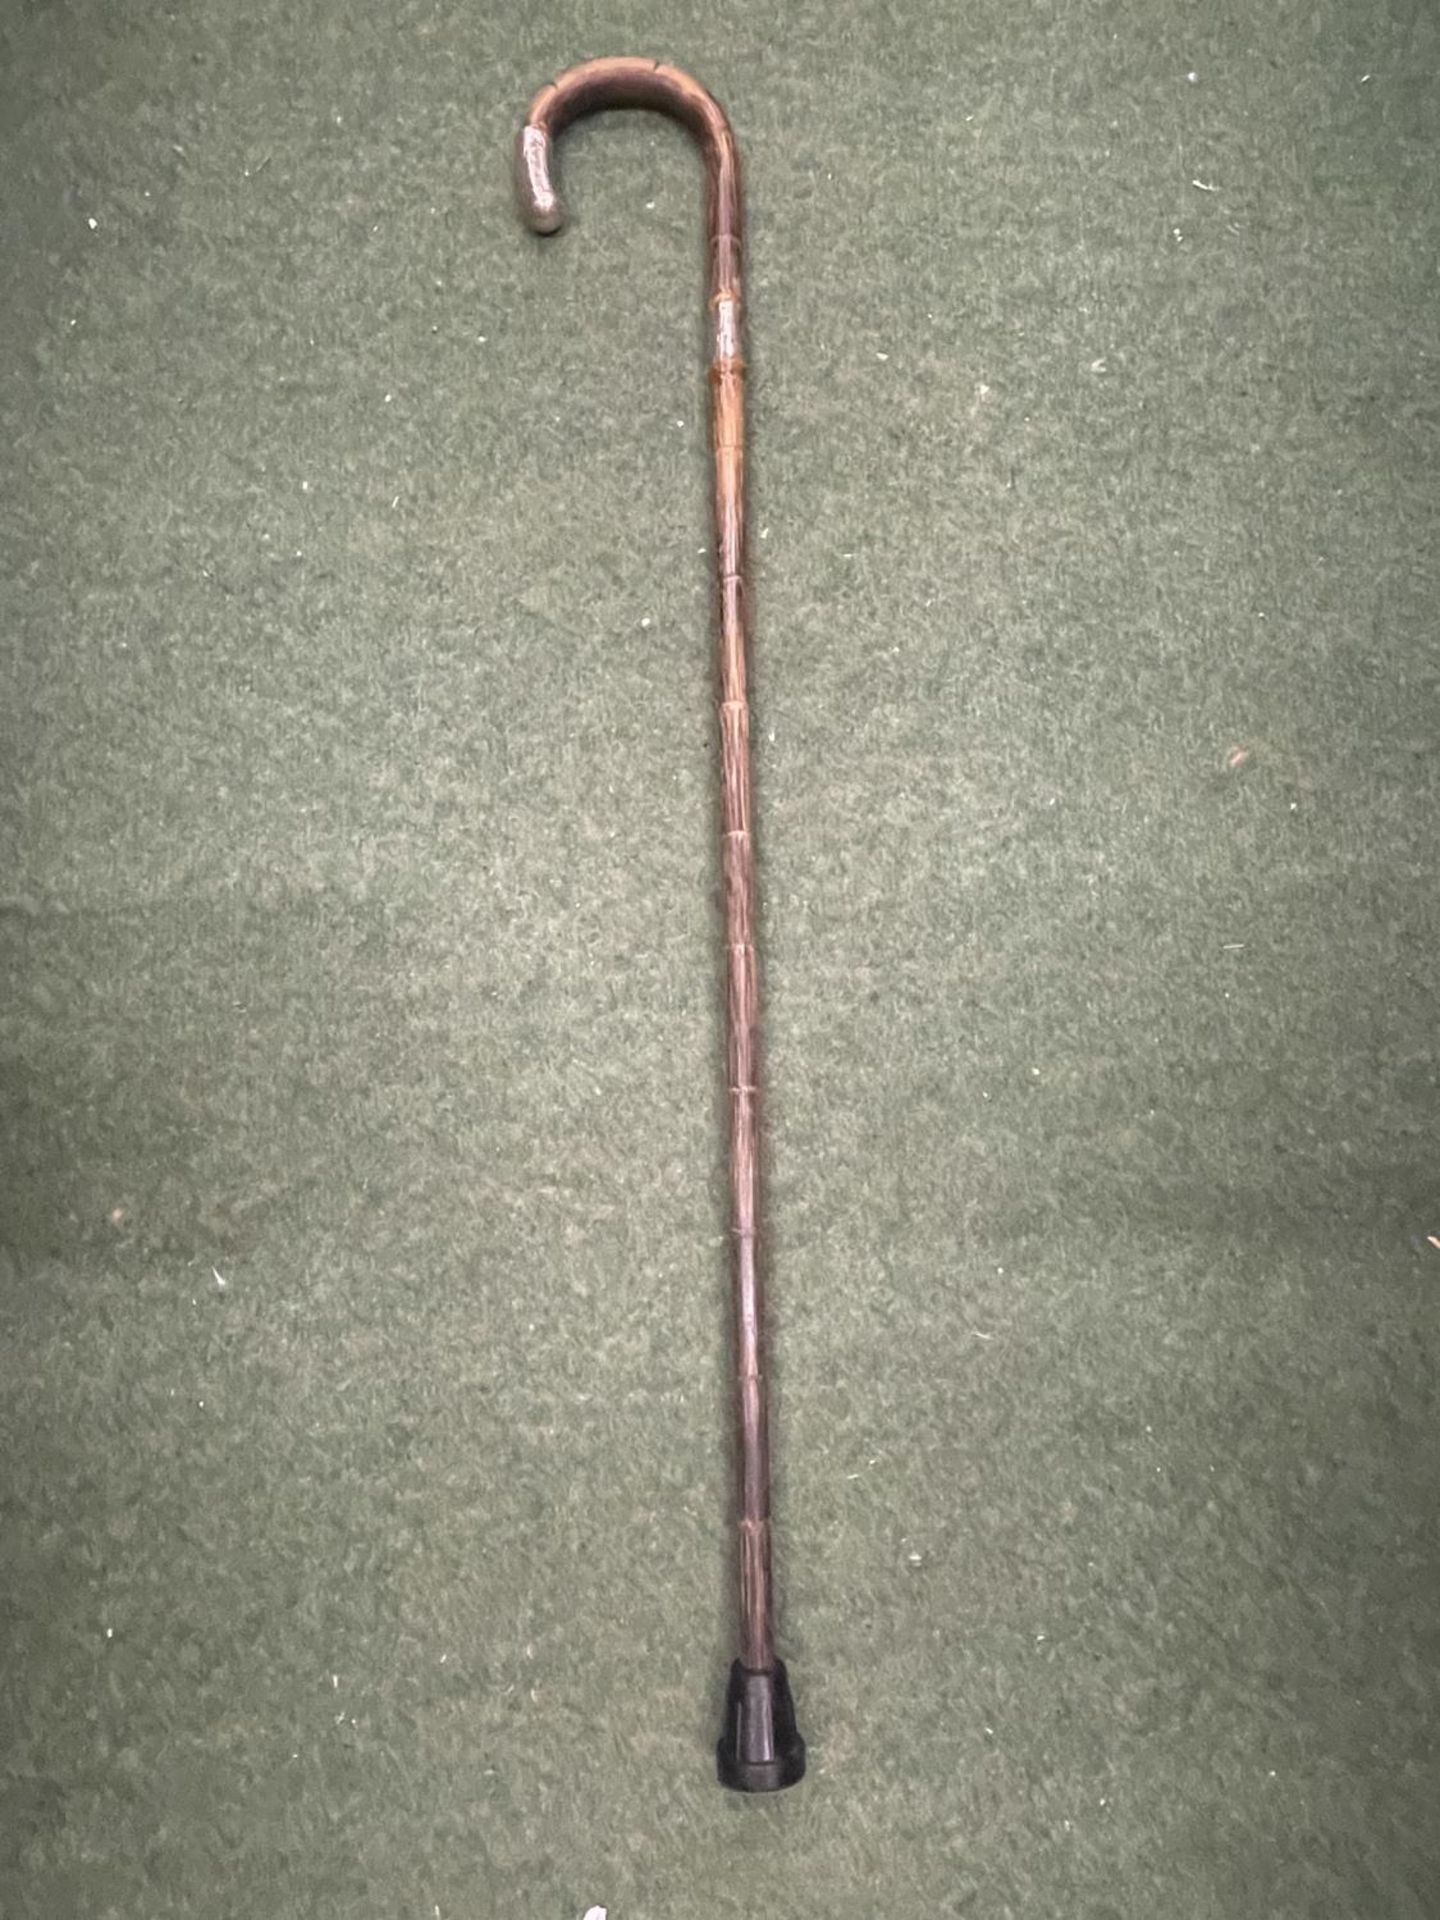 A WALKING CANE WITH A HALLMARKED SILVER FERRULE AND HANDLE TIP